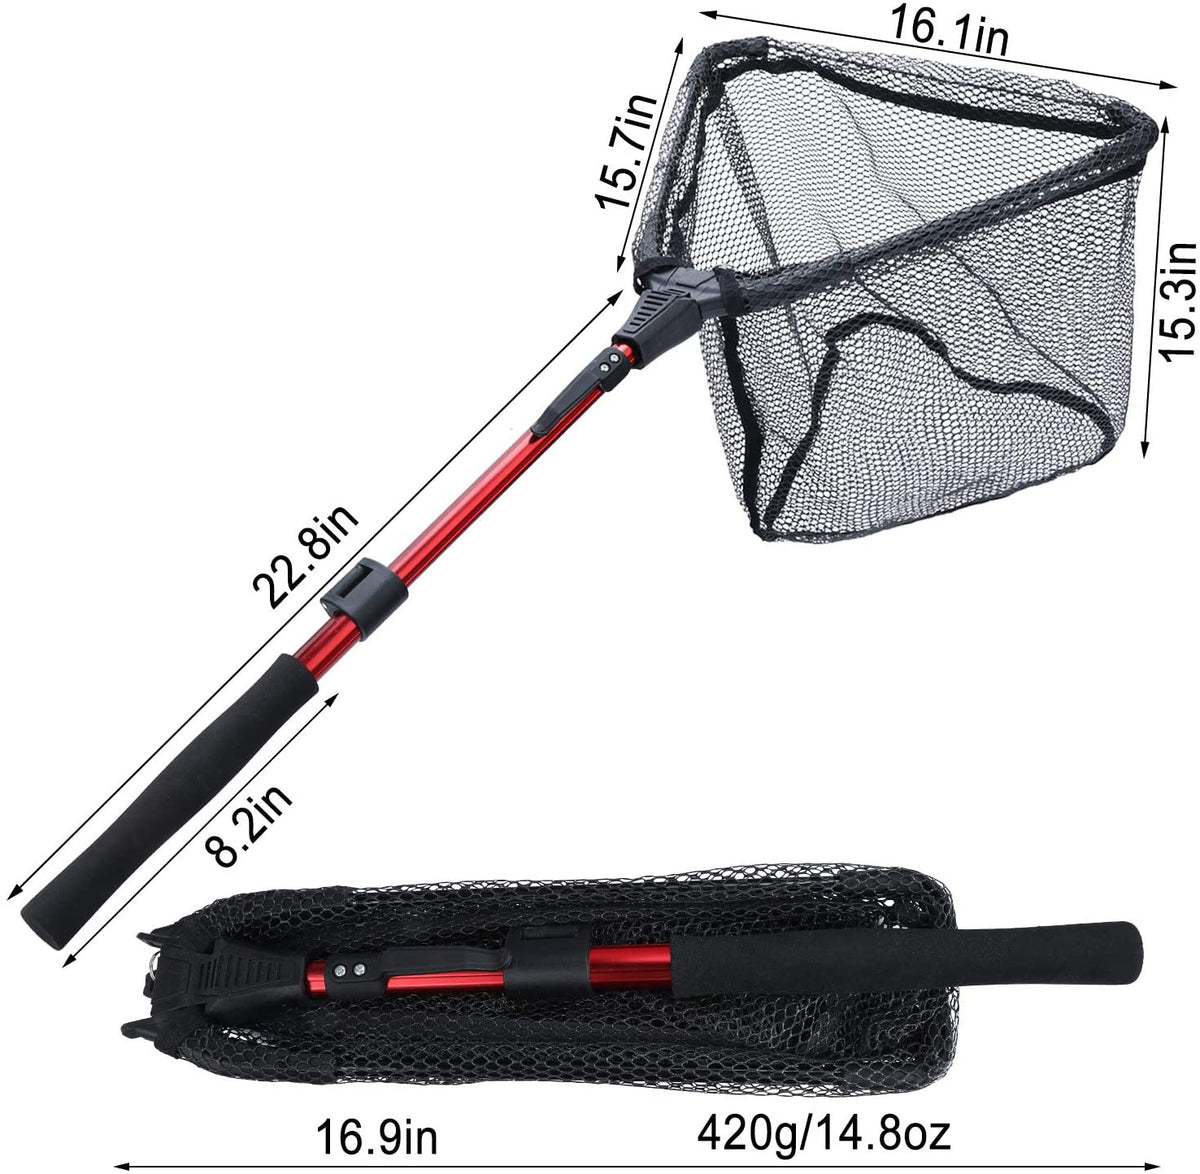 Portable Fishing Net Fish Landing Net, Foldable Collapsible Telescopic Pole  Handle, Durable Nylon Material Mesh, Safe Fish Catching or Releasing 